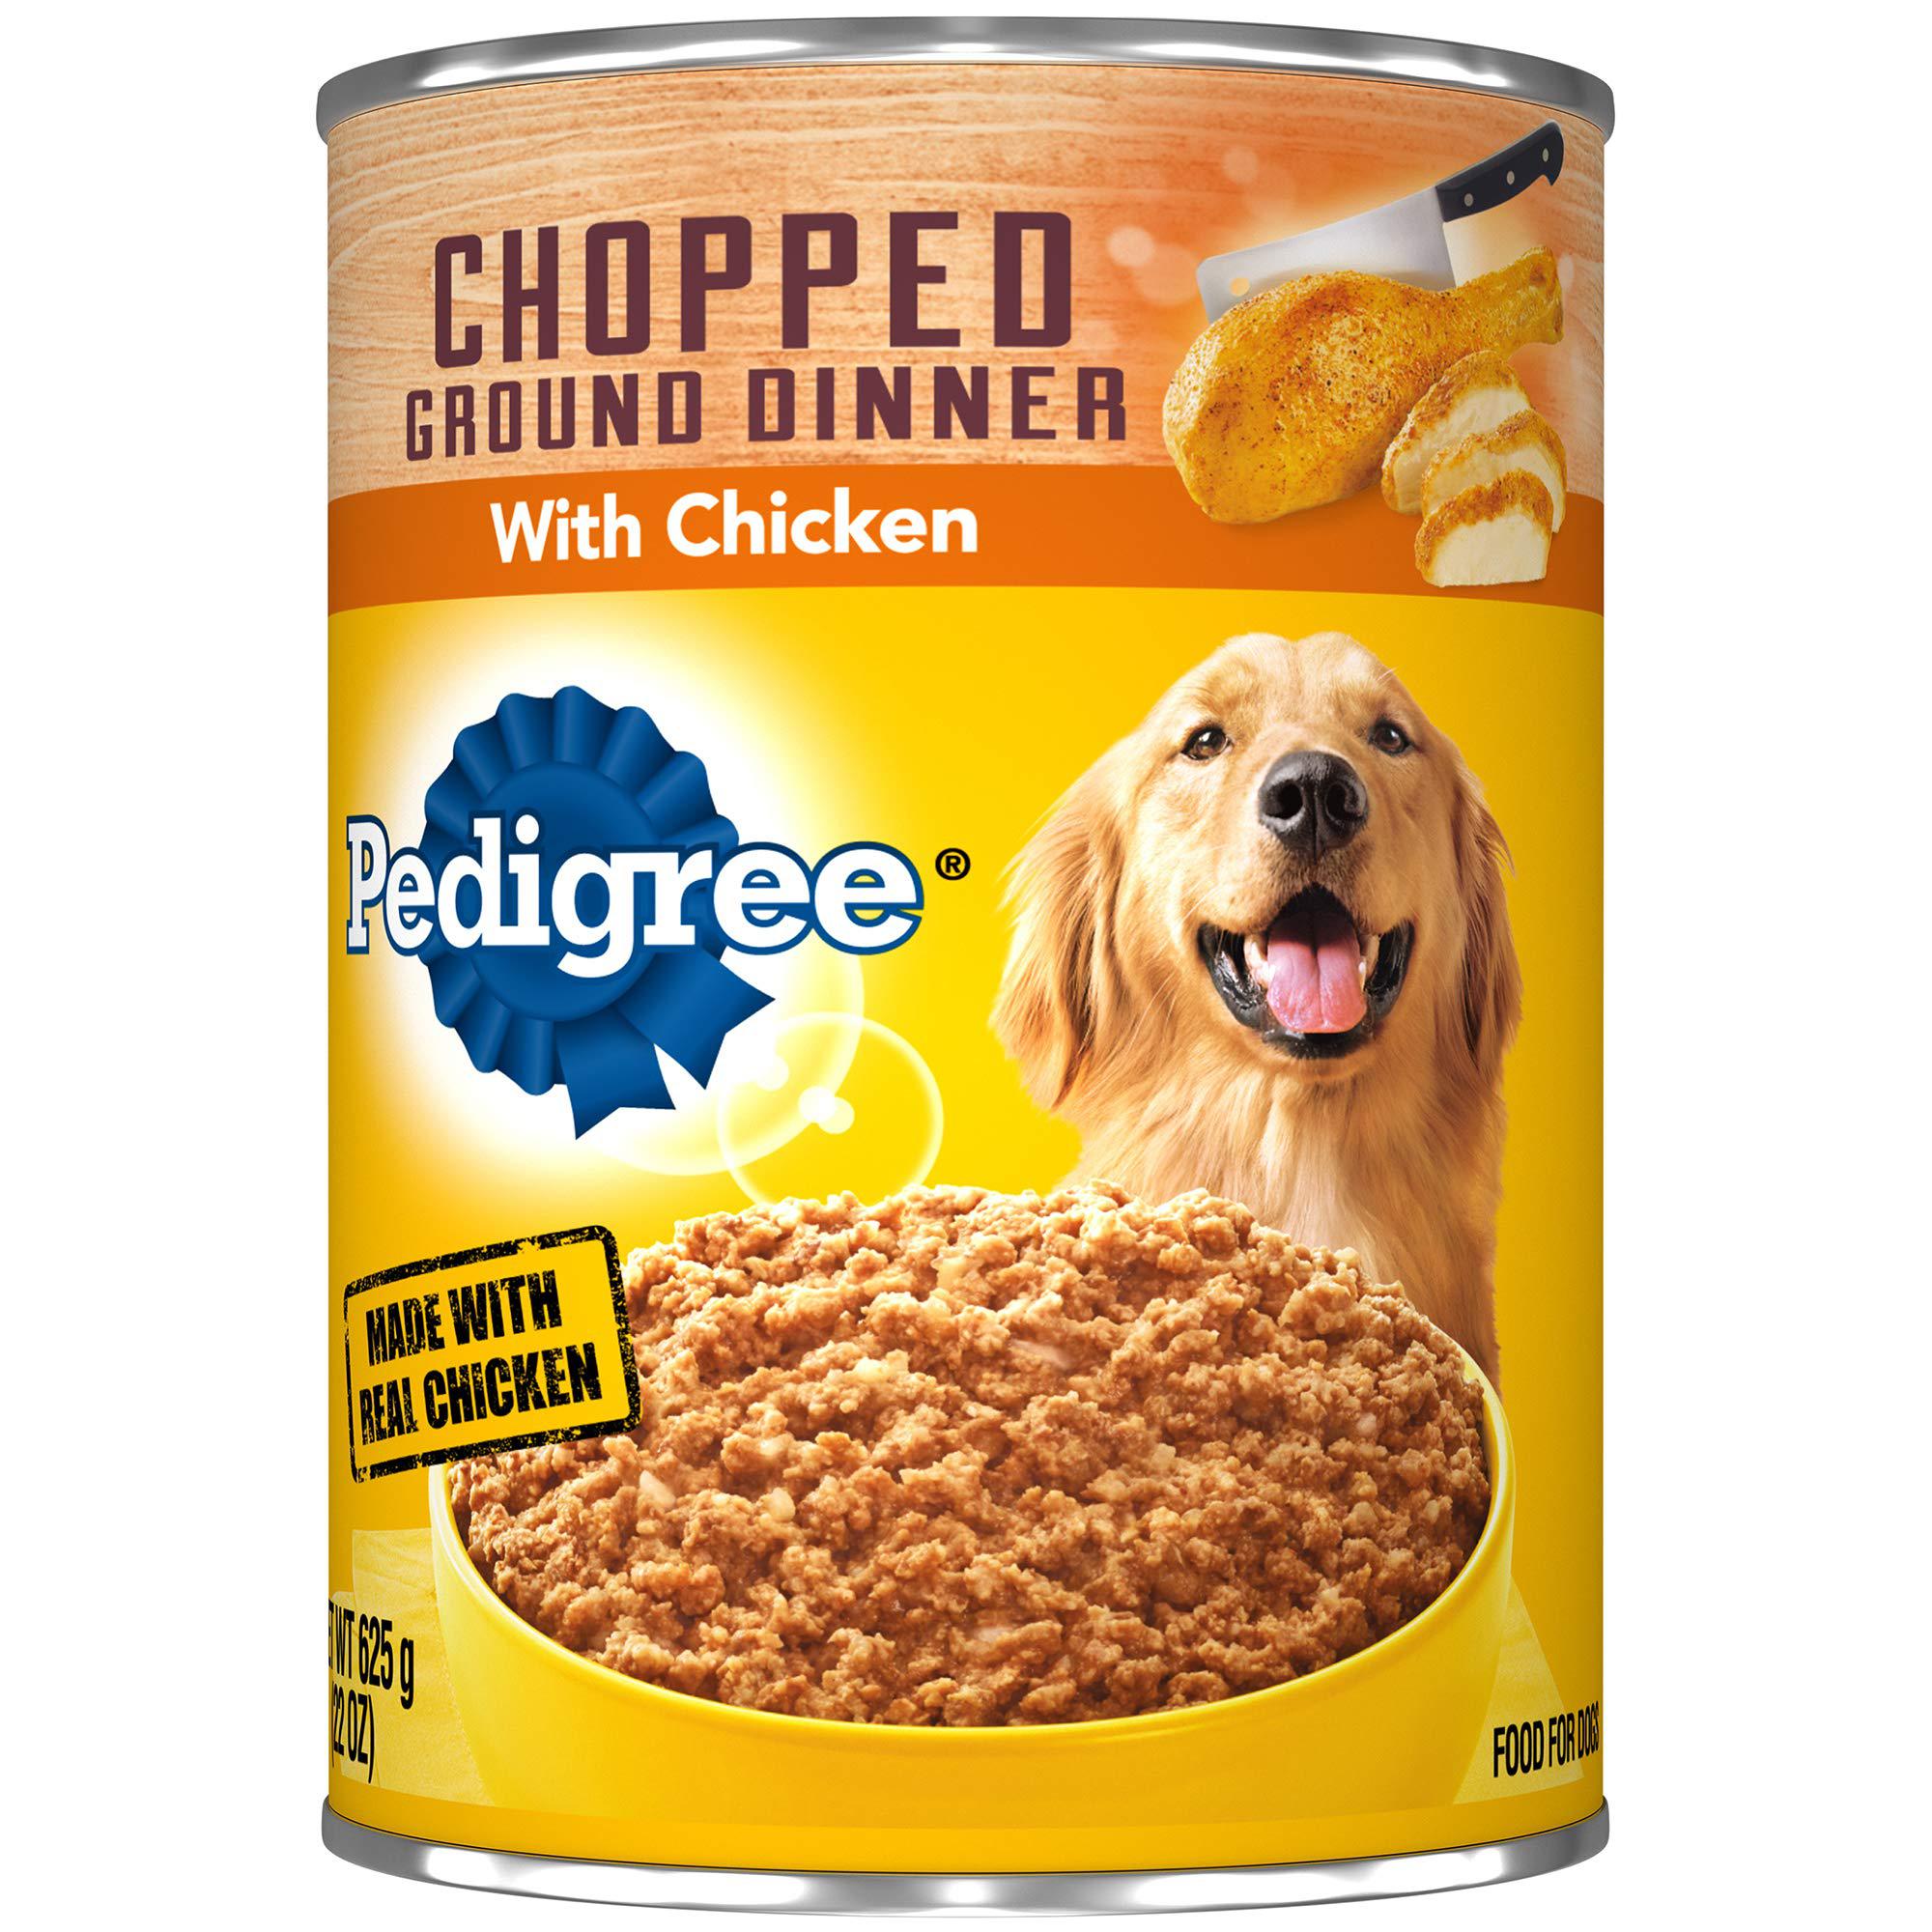 pedigree chopped ground dinner with chicken canned dog food 22 ounces